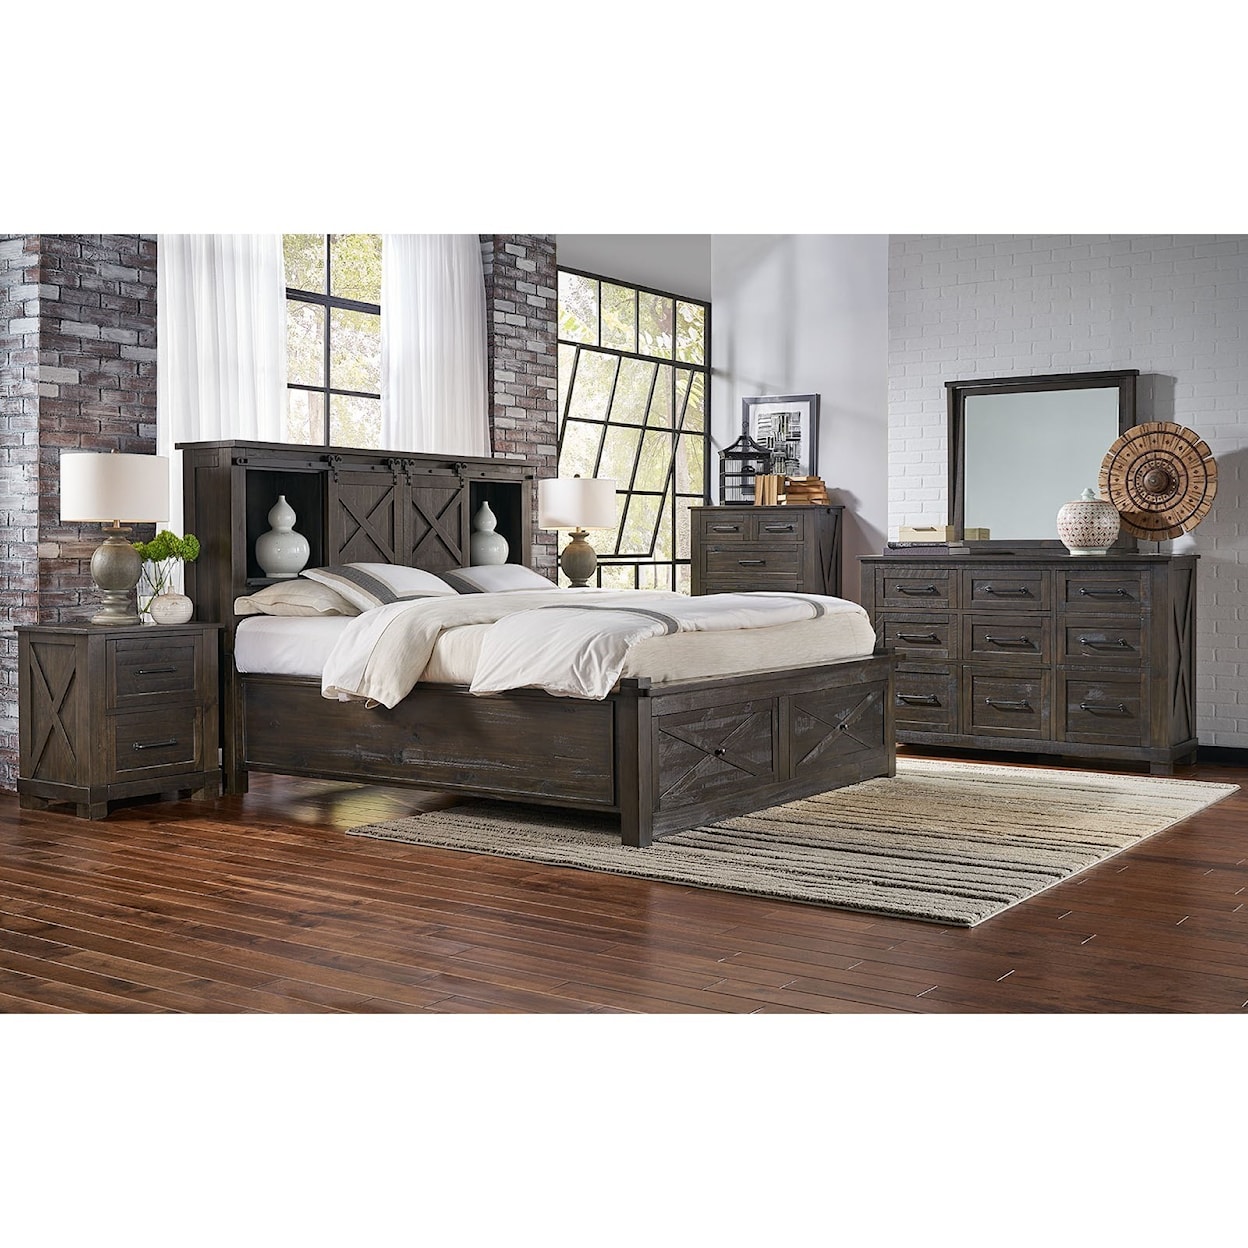 A-A Sun Valley California King Bed with Footboard Bench